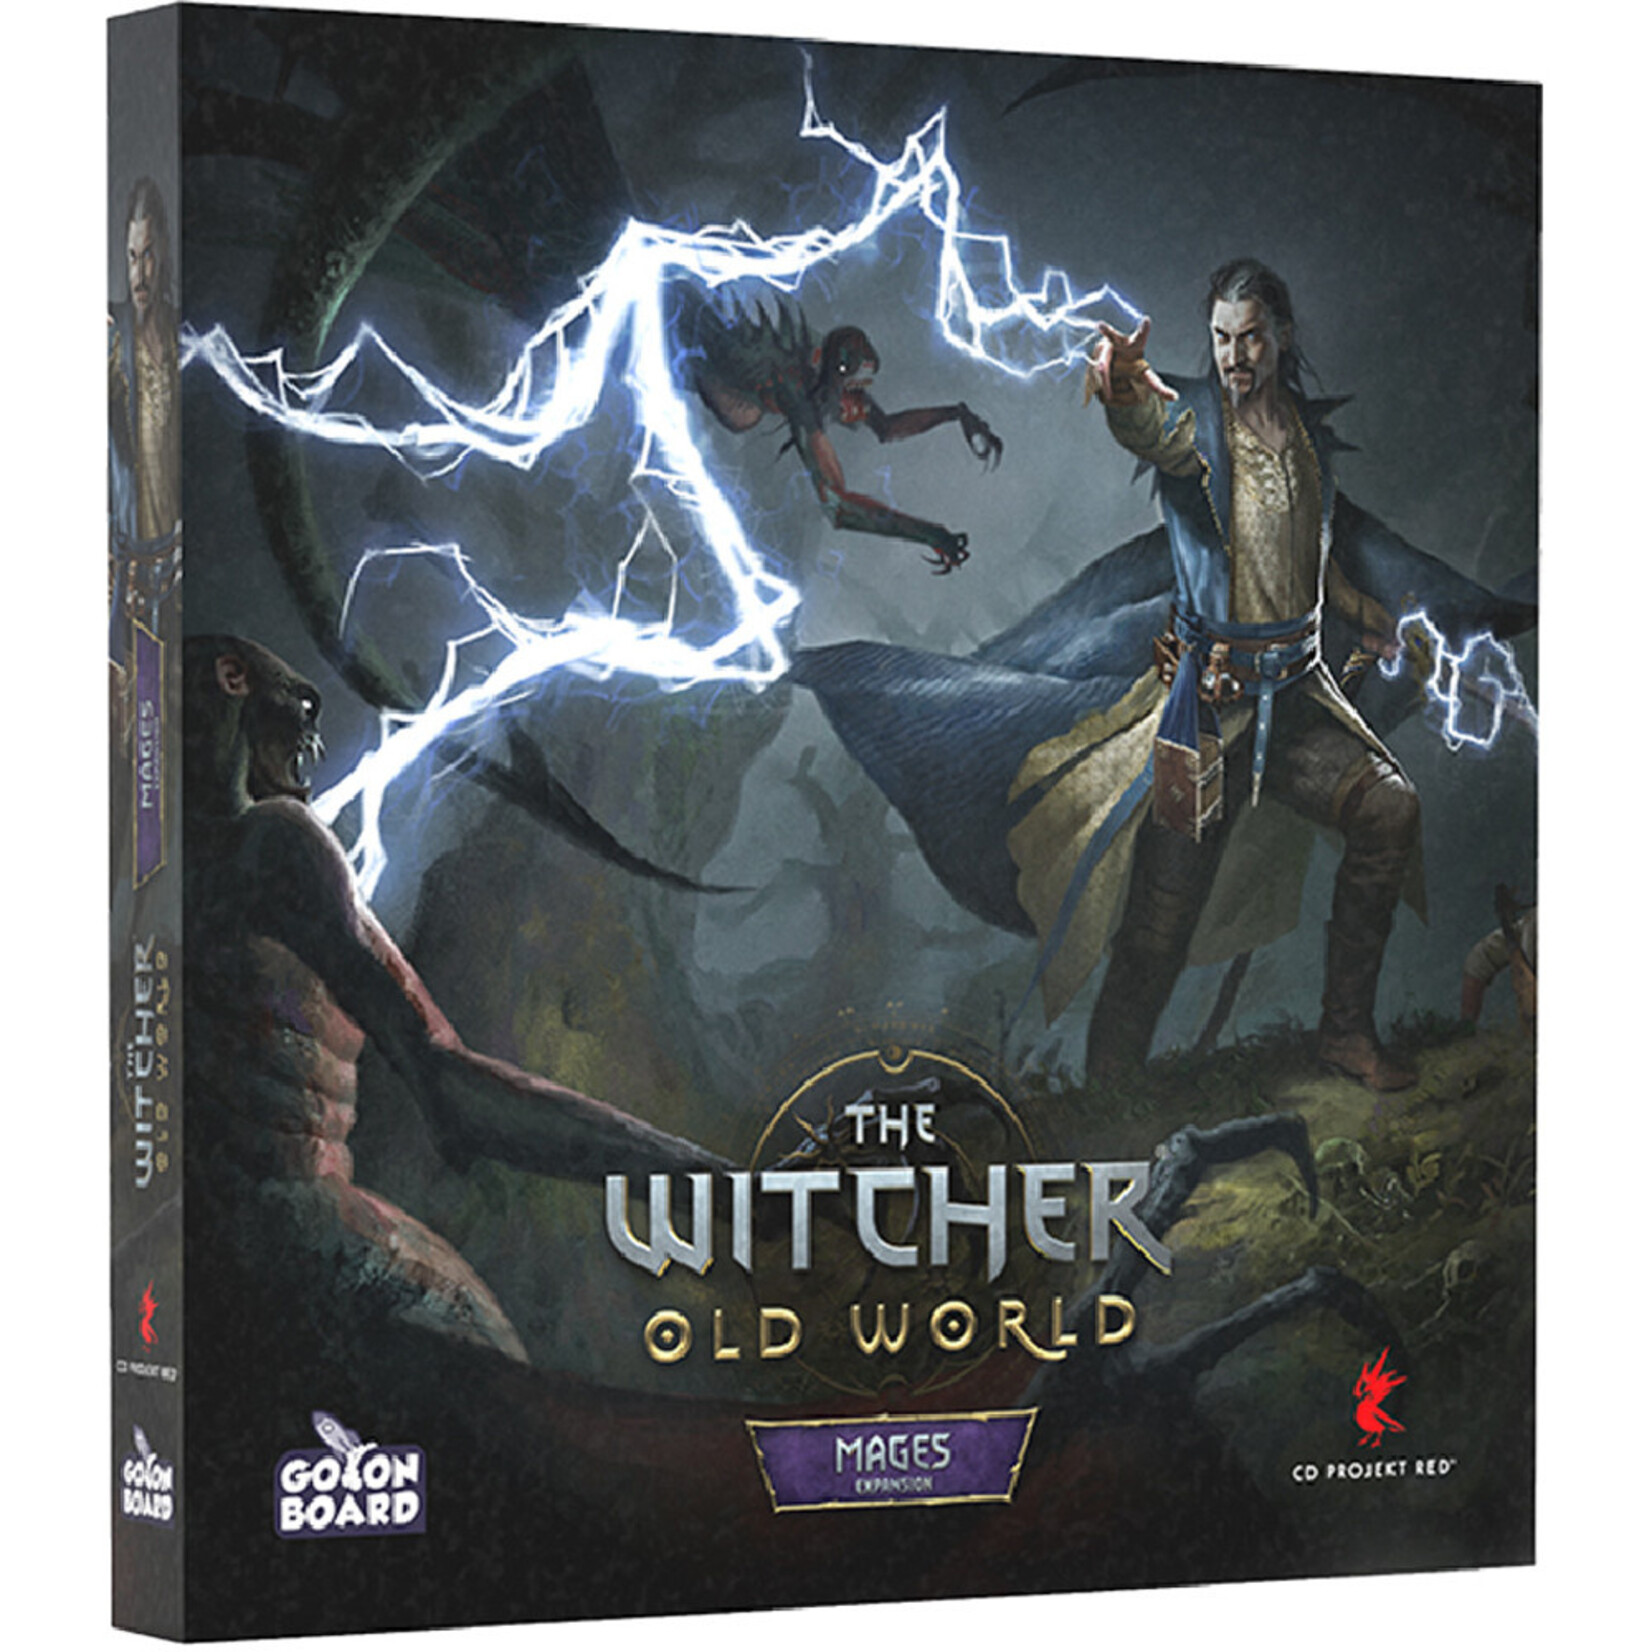 Go On Board The Witcher Old World Mages Expansion (EN)